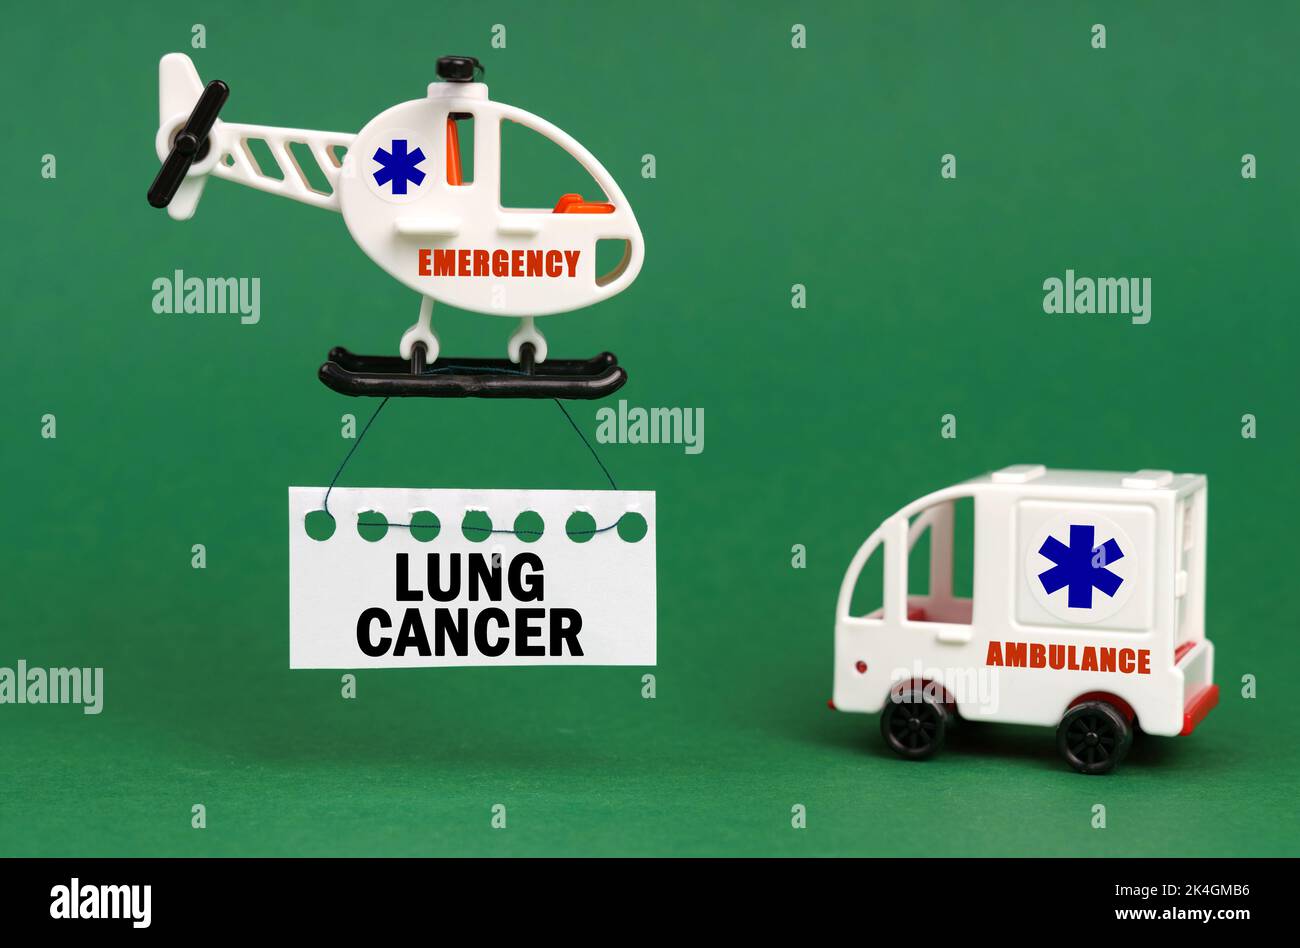 Medical concept. On a green surface, an ambulance car and a helicopter with a sign - LUNG CANCER Stock Photo